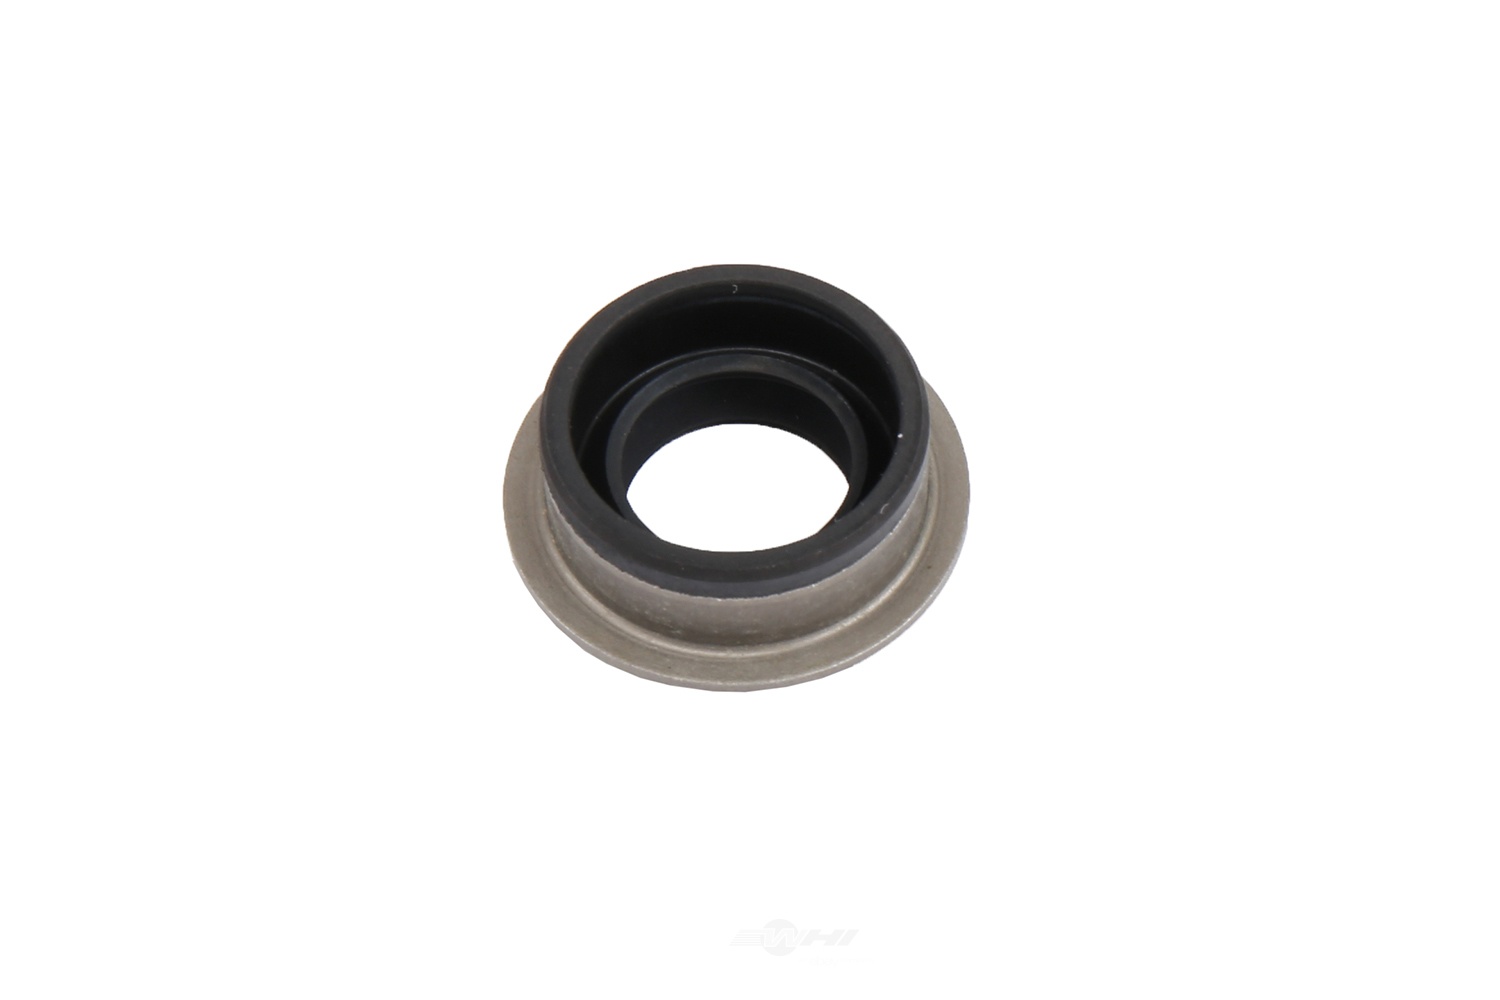 GM GENUINE PARTS - Automatic Transmission Manual Shaft Seal - GMP 24256576